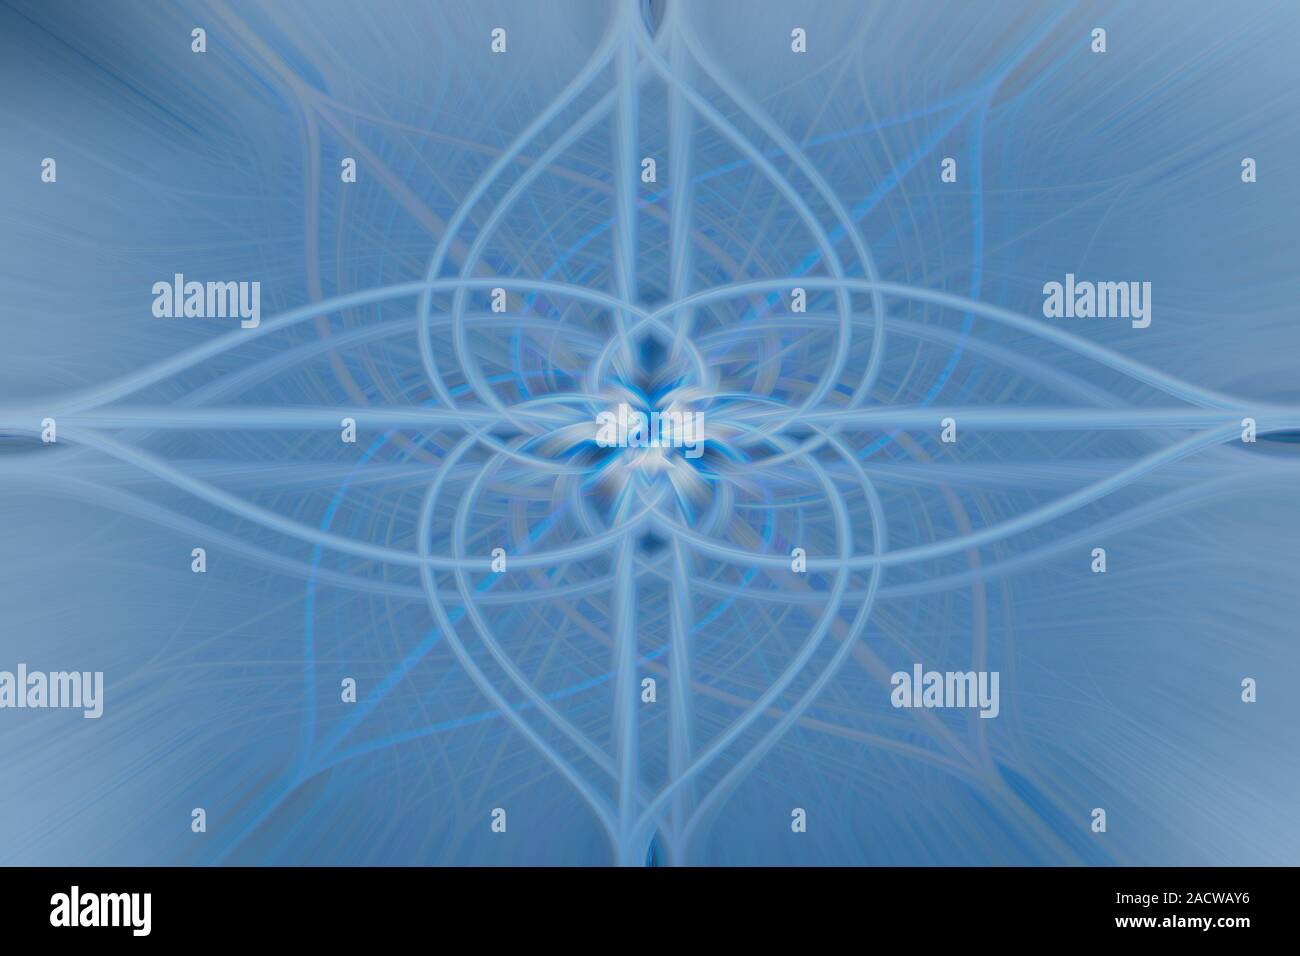 Abstract background, symmetrically shaped, with beautiful soft blue colors flow into each other Stock Photo